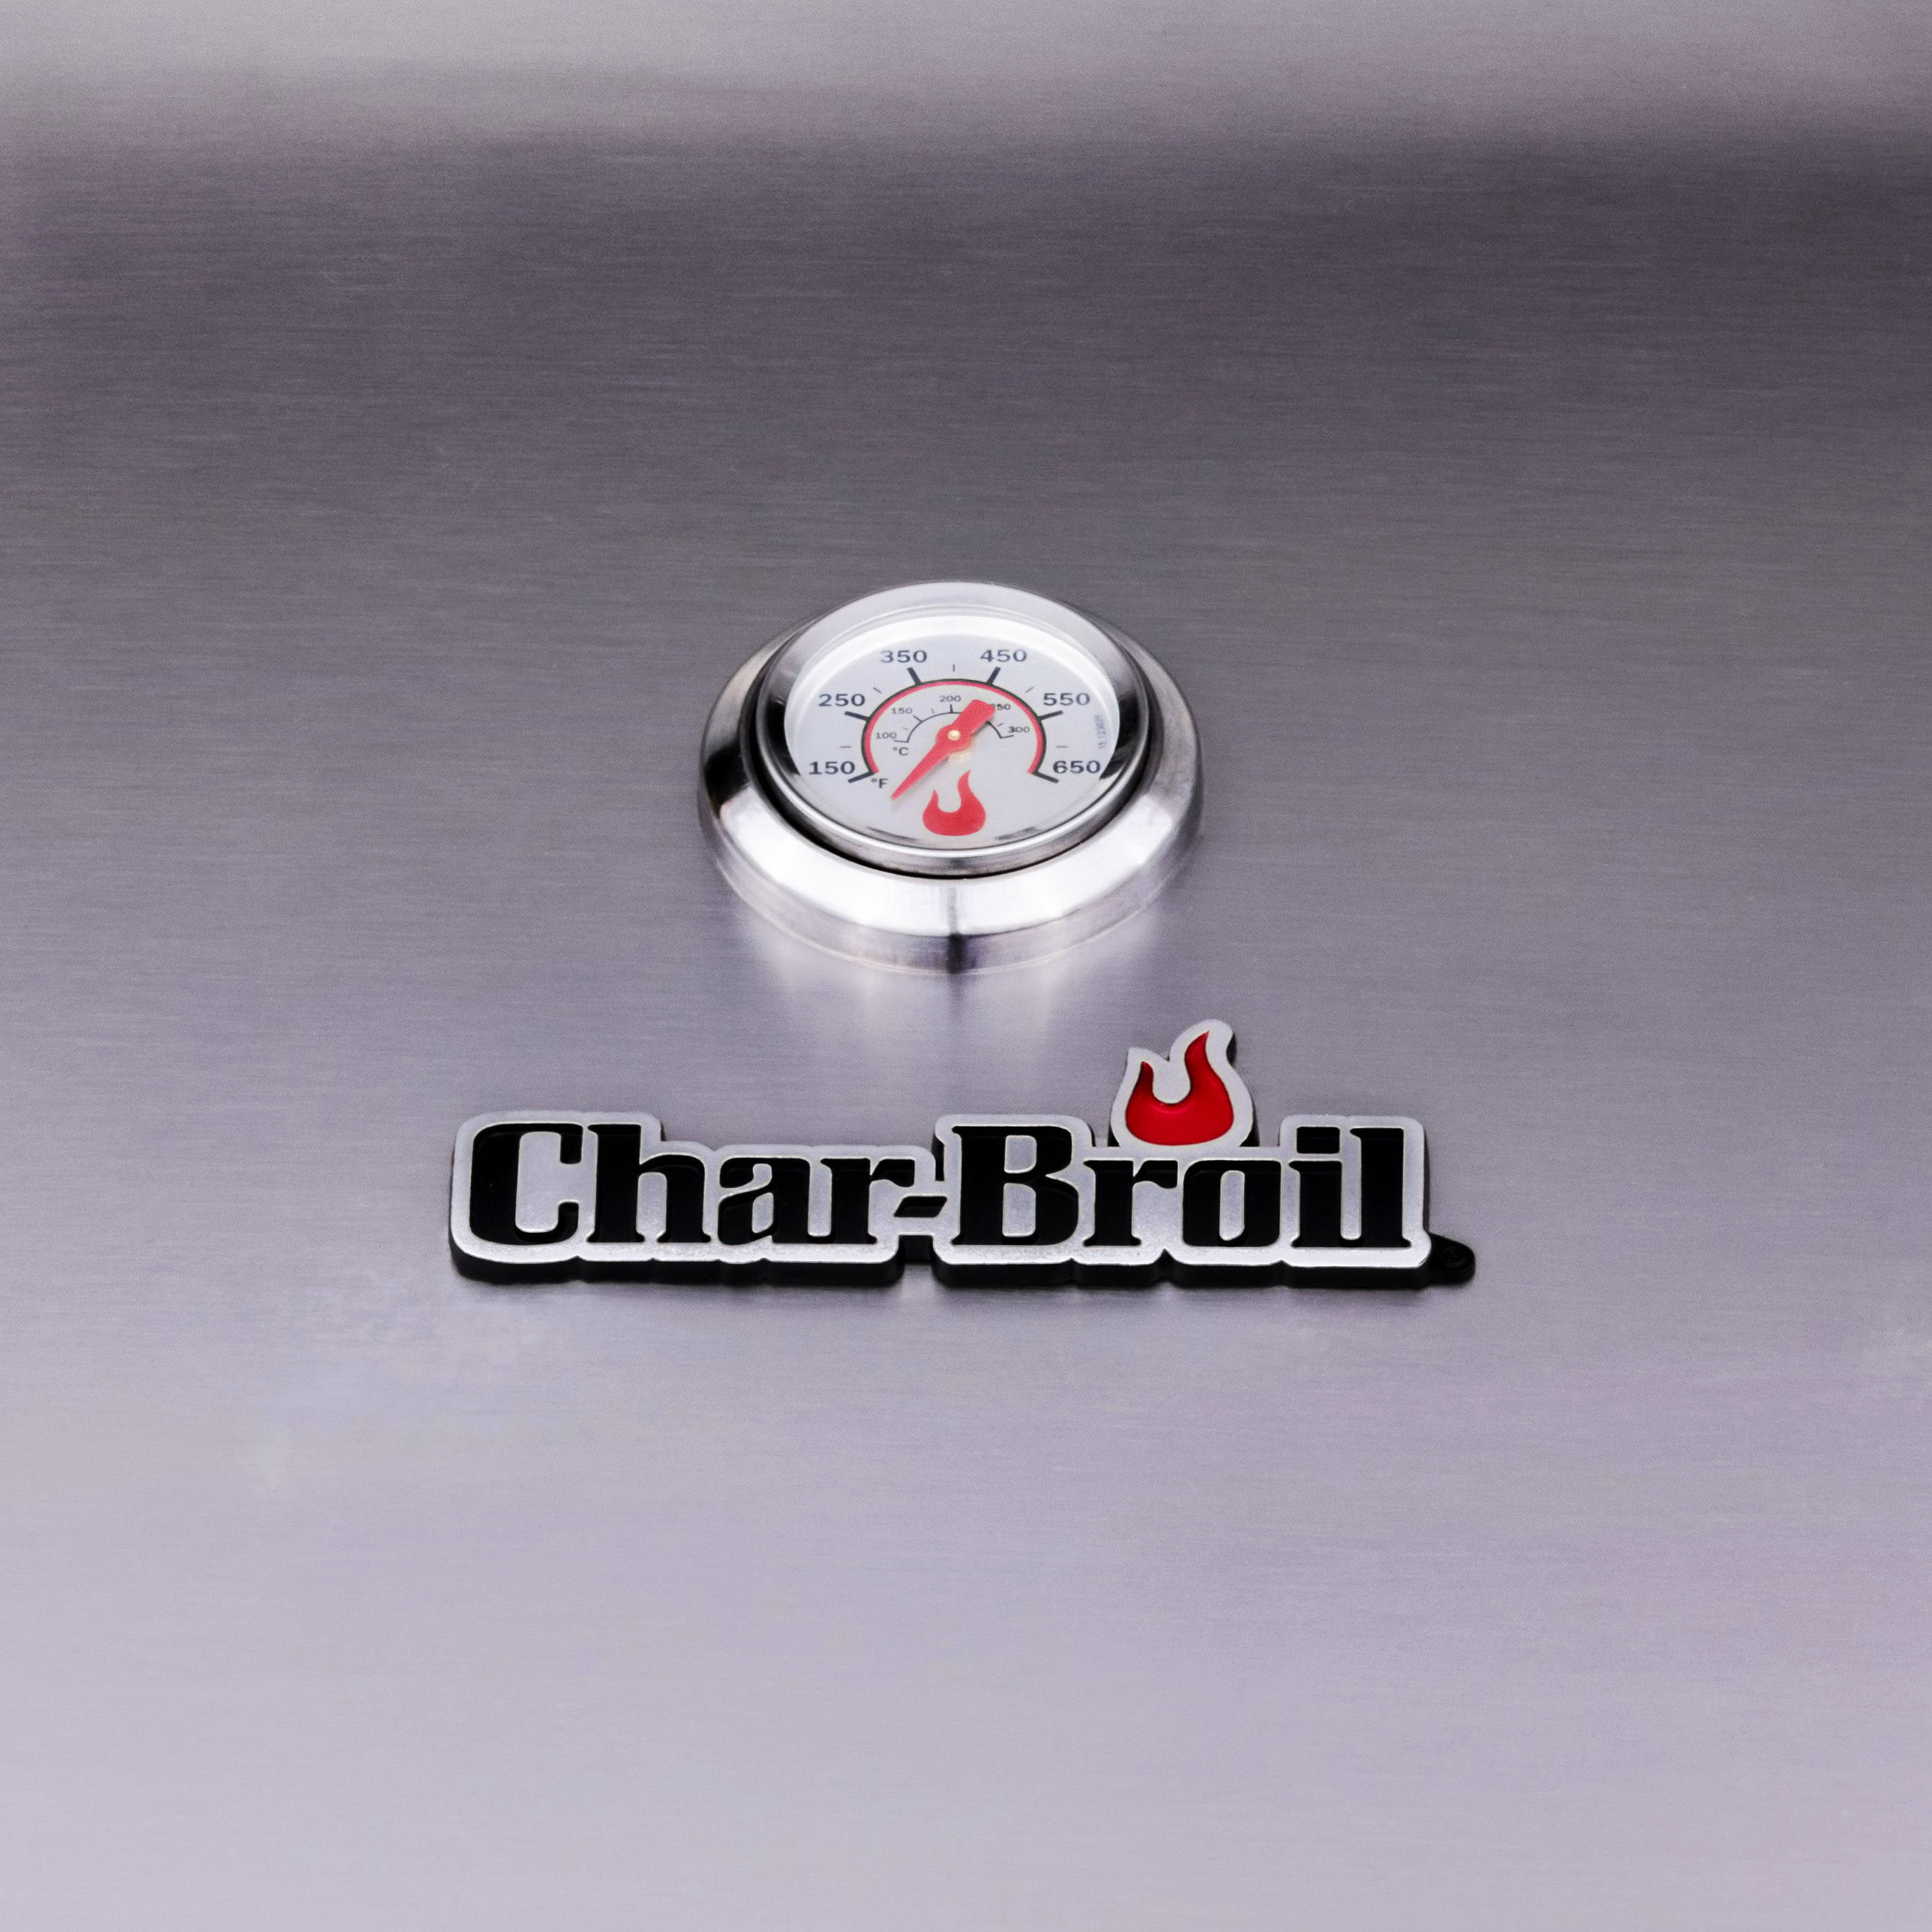 Char-Broil Performance 5-Burner Liquid Propane Gas Grill, Stainless Steel - image 3 of 18